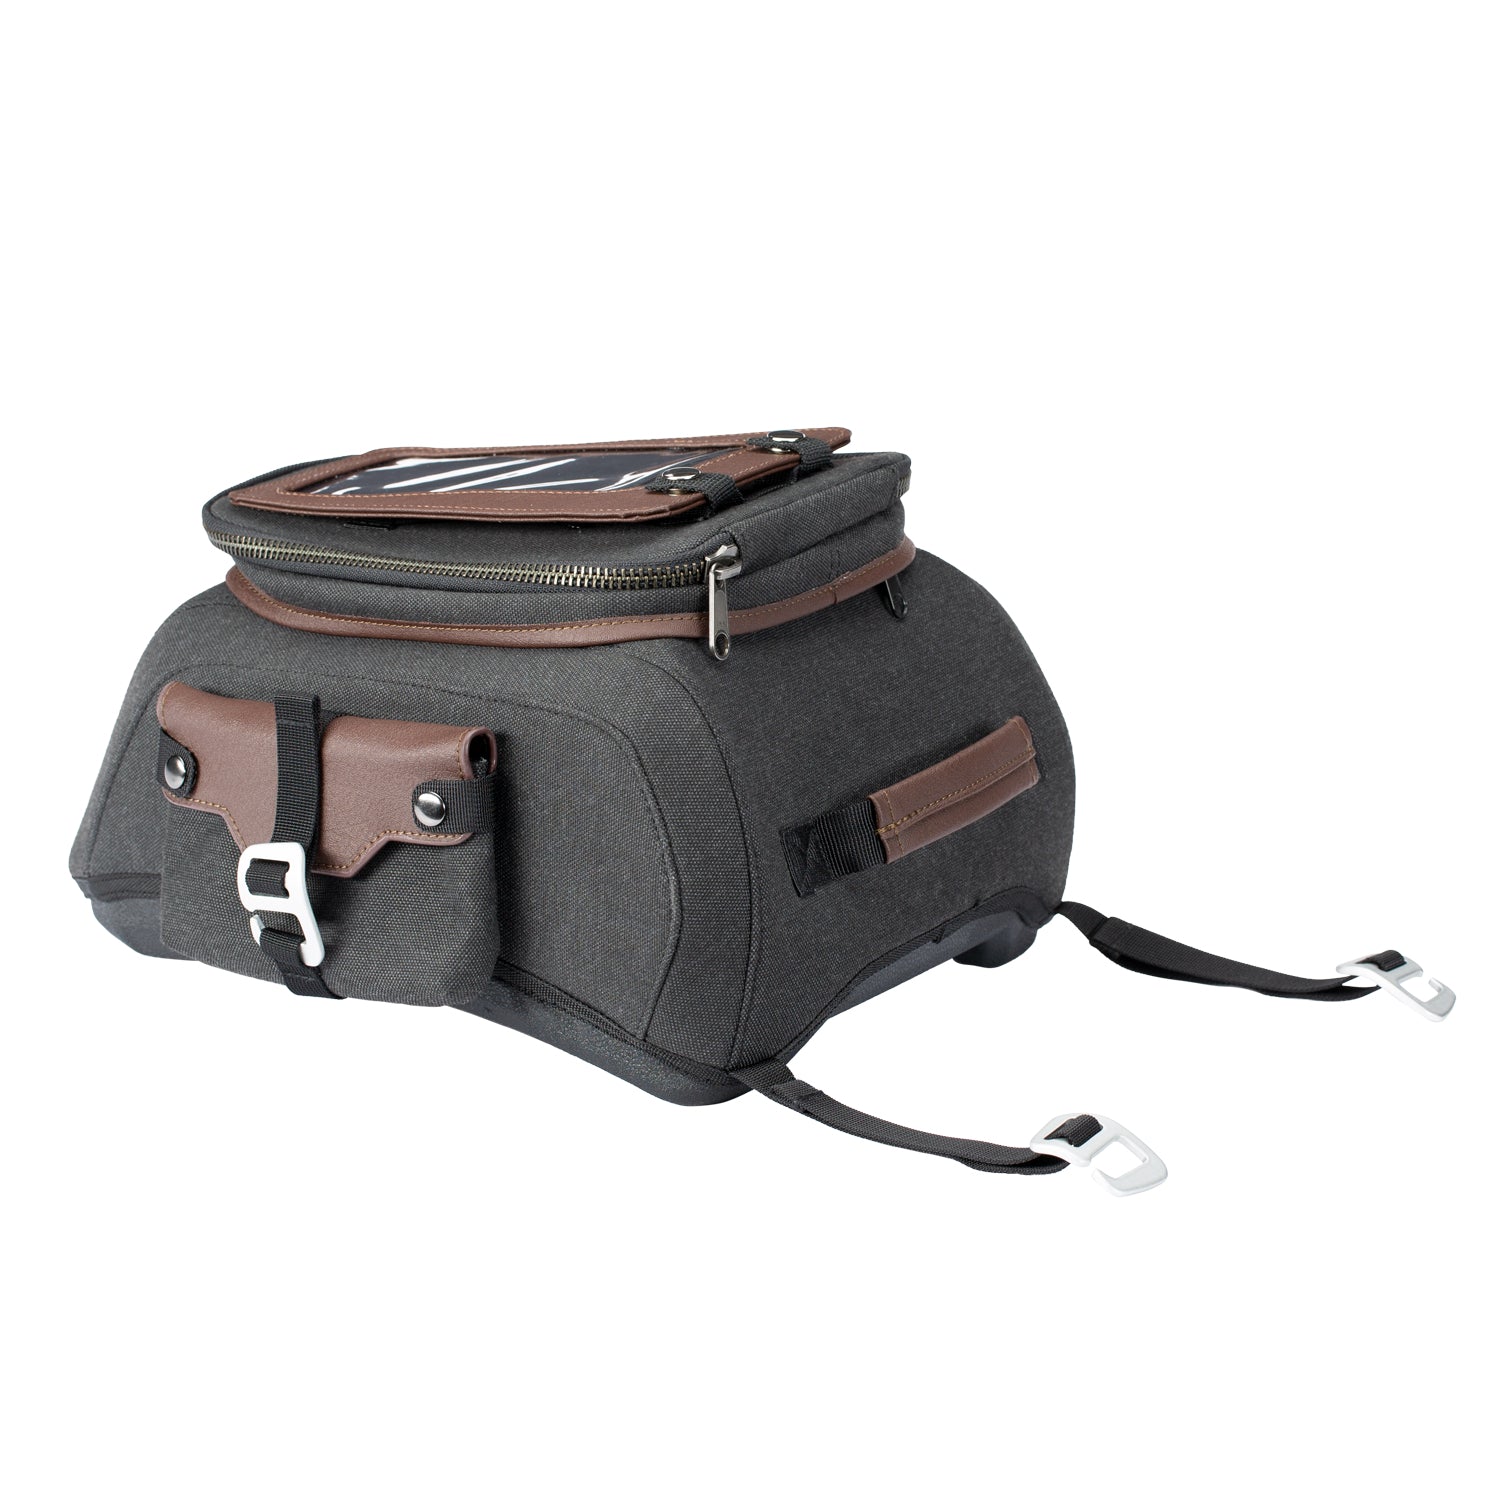 All-Weather Vinyl Tank Bag with Protective Phone Pocket, Gray/Brown